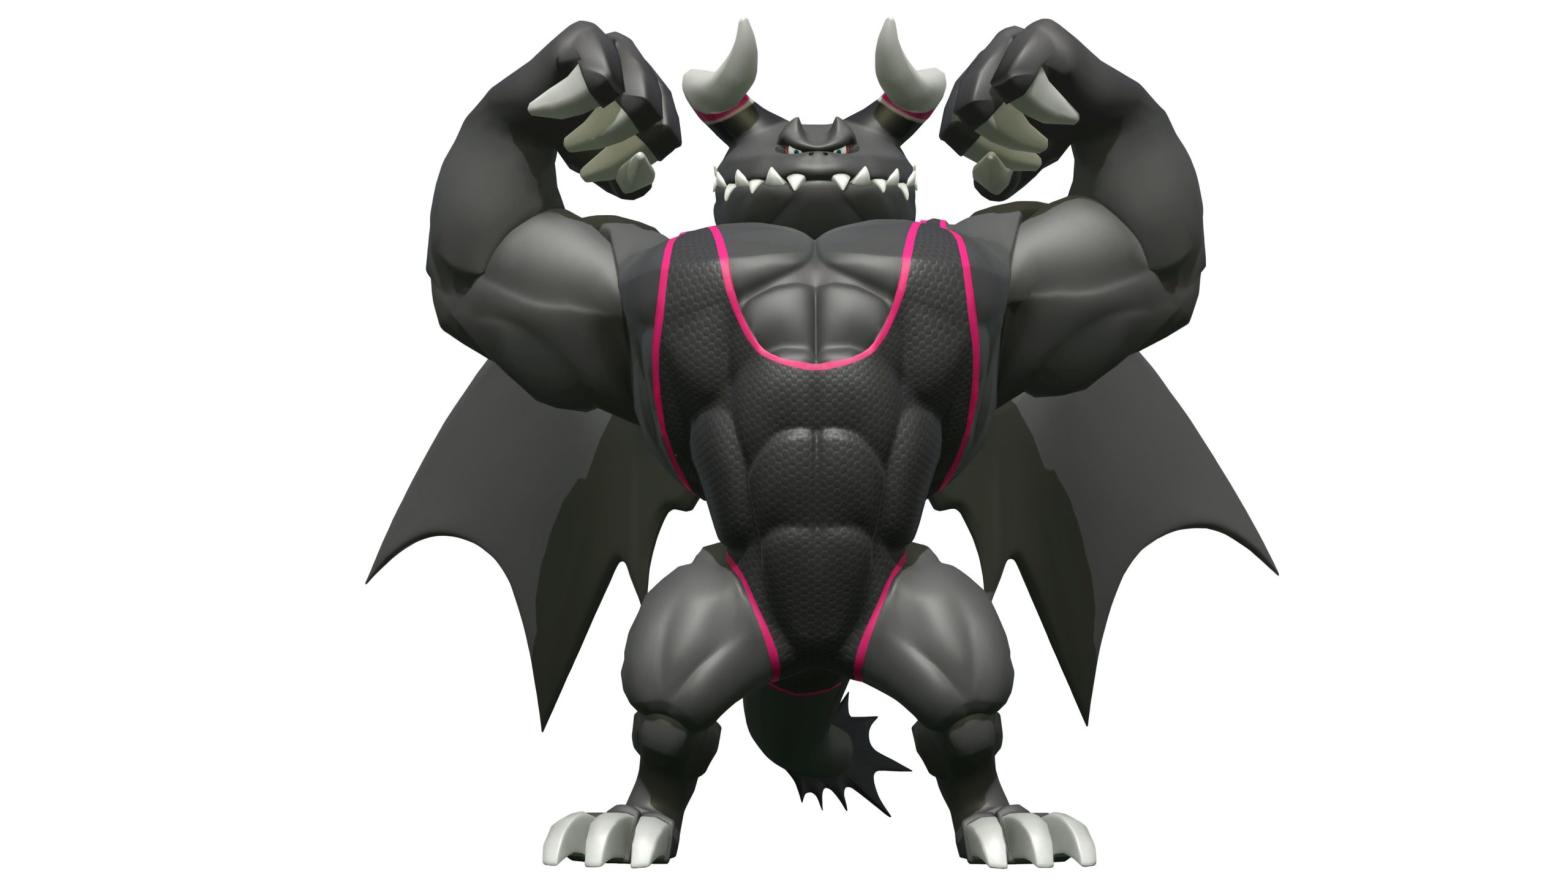 This is the ideal male body. You may not like it, but this is what peak performance looks like. (Image: Nintendo)